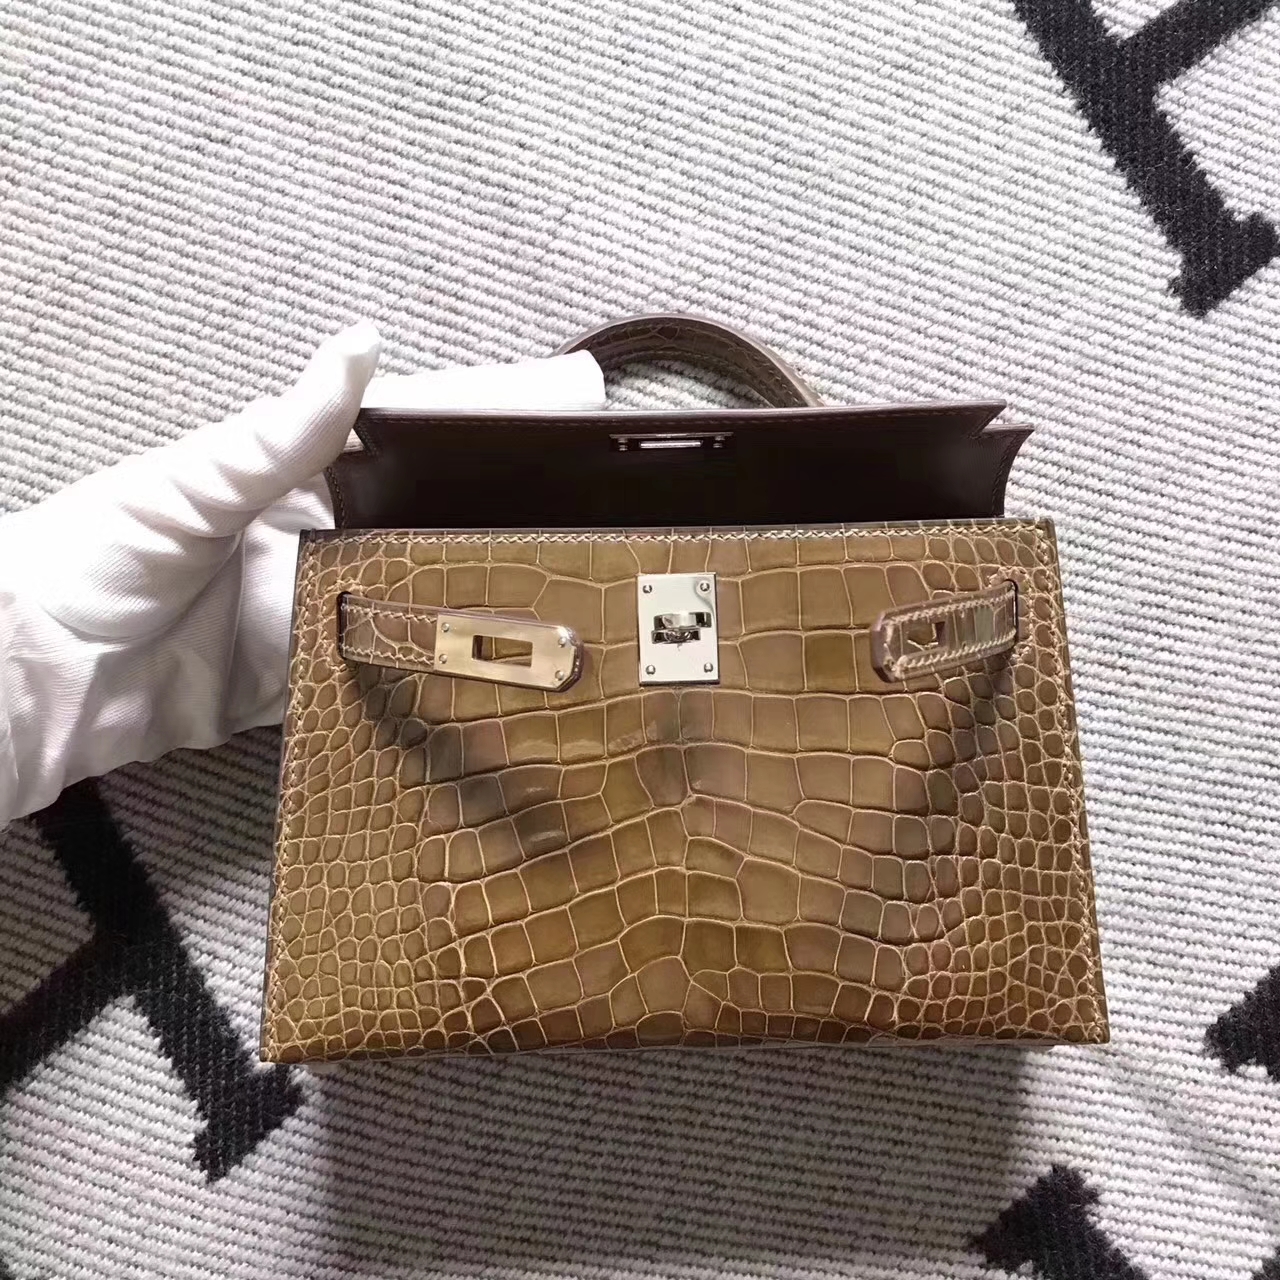 New Arrival Hermes Minikelly-2 Clutch Bag in Brown Crocodile Leather